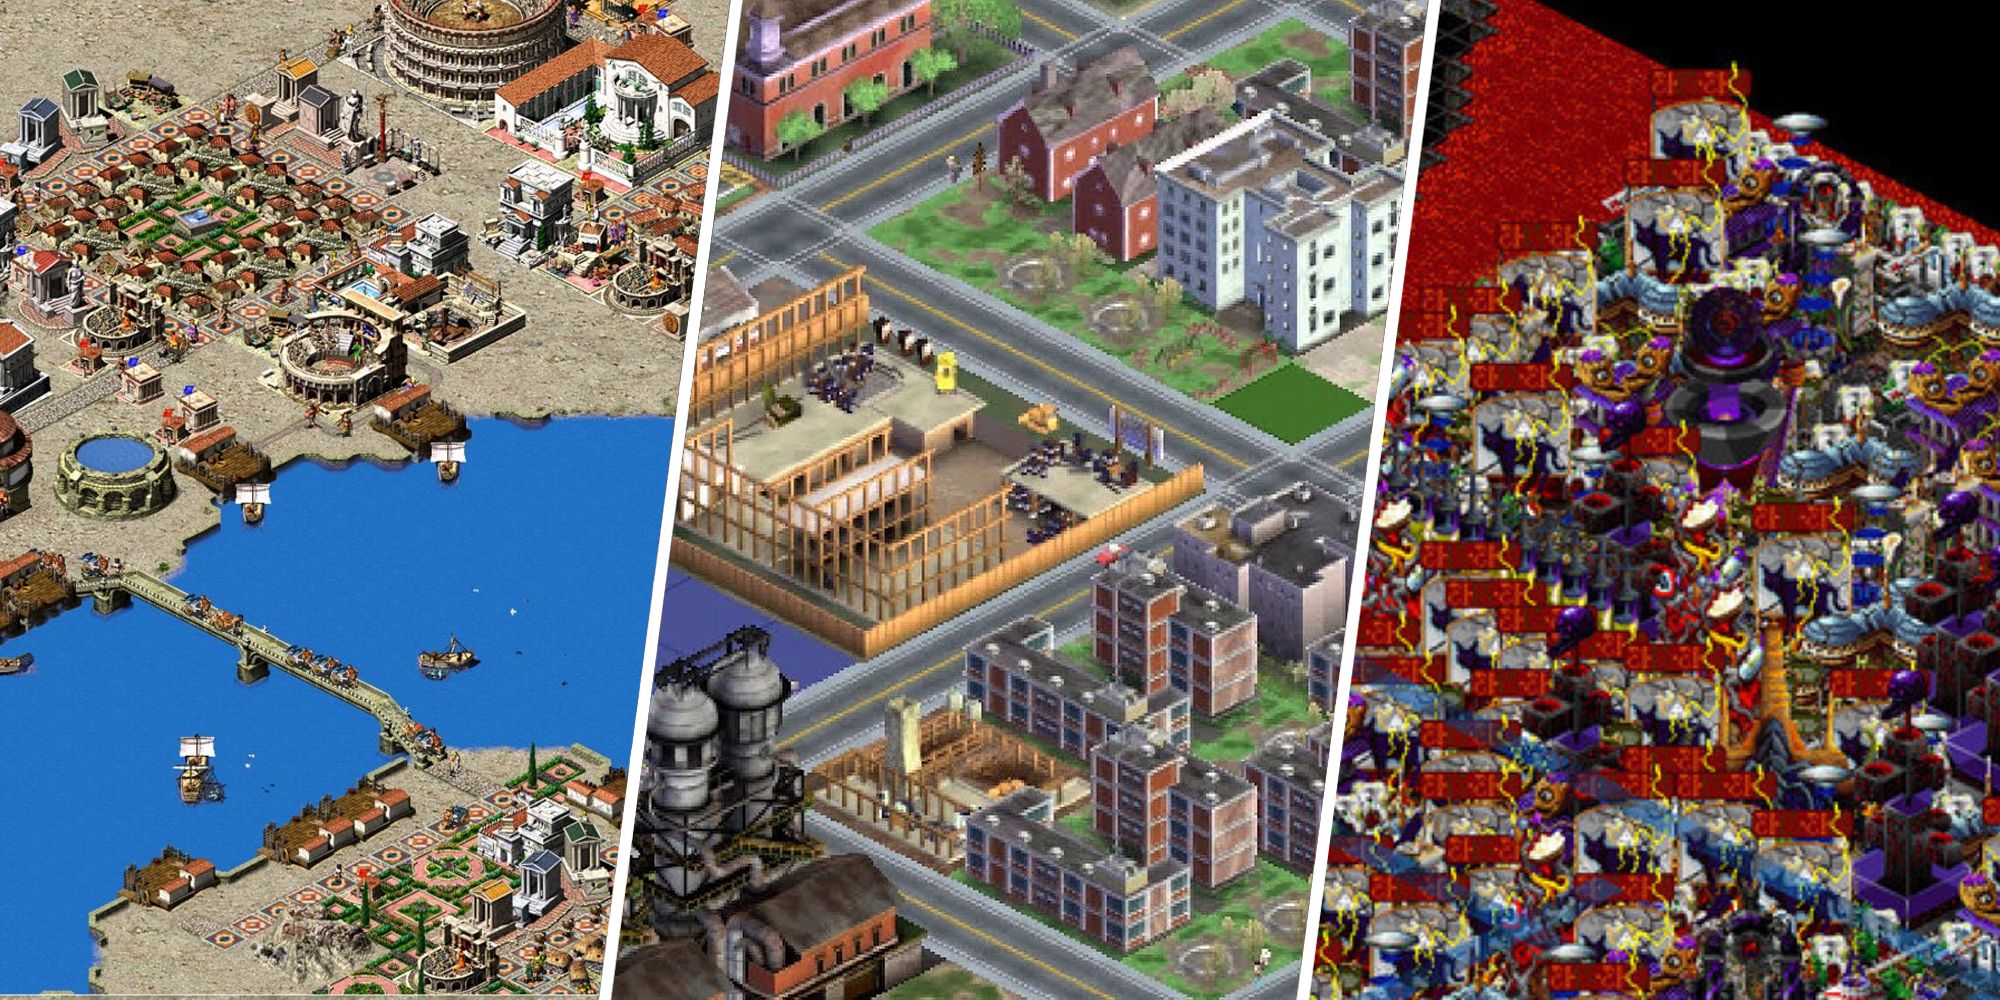 Caesar 3, SimCity3000, and Afterlife